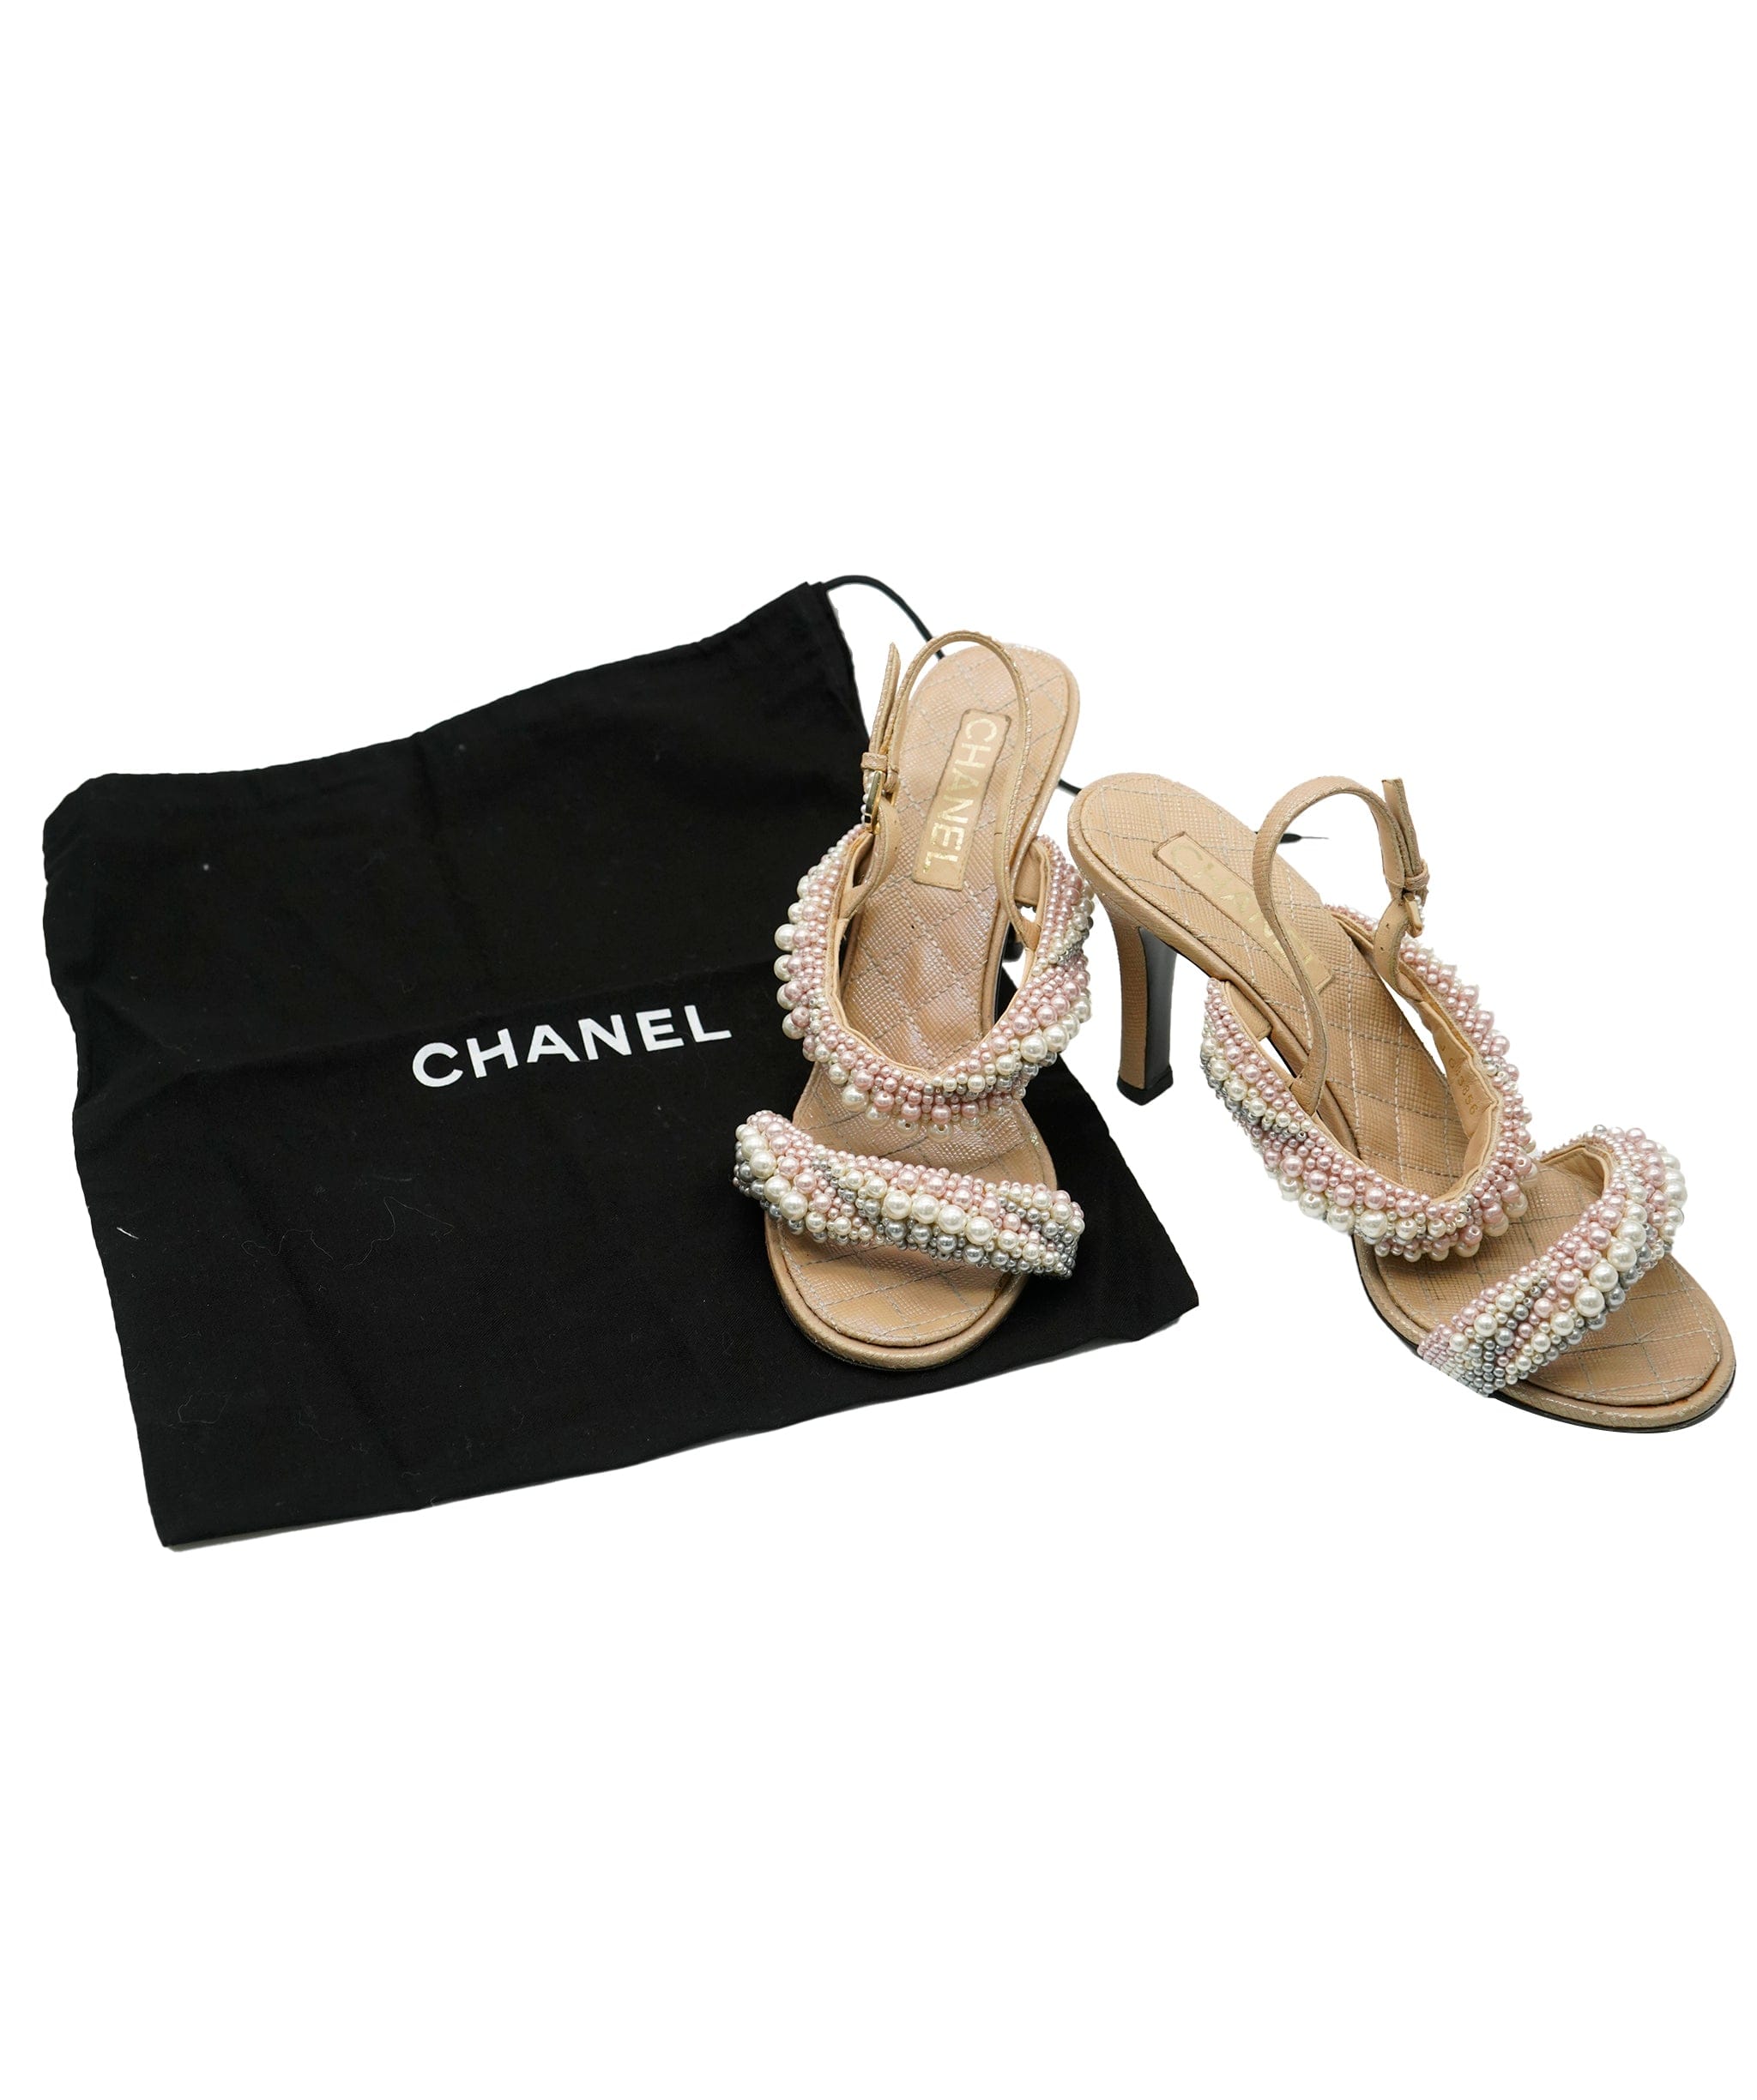 Chanel Chanel Pearl shoes dustbag 39.5 ASC4865